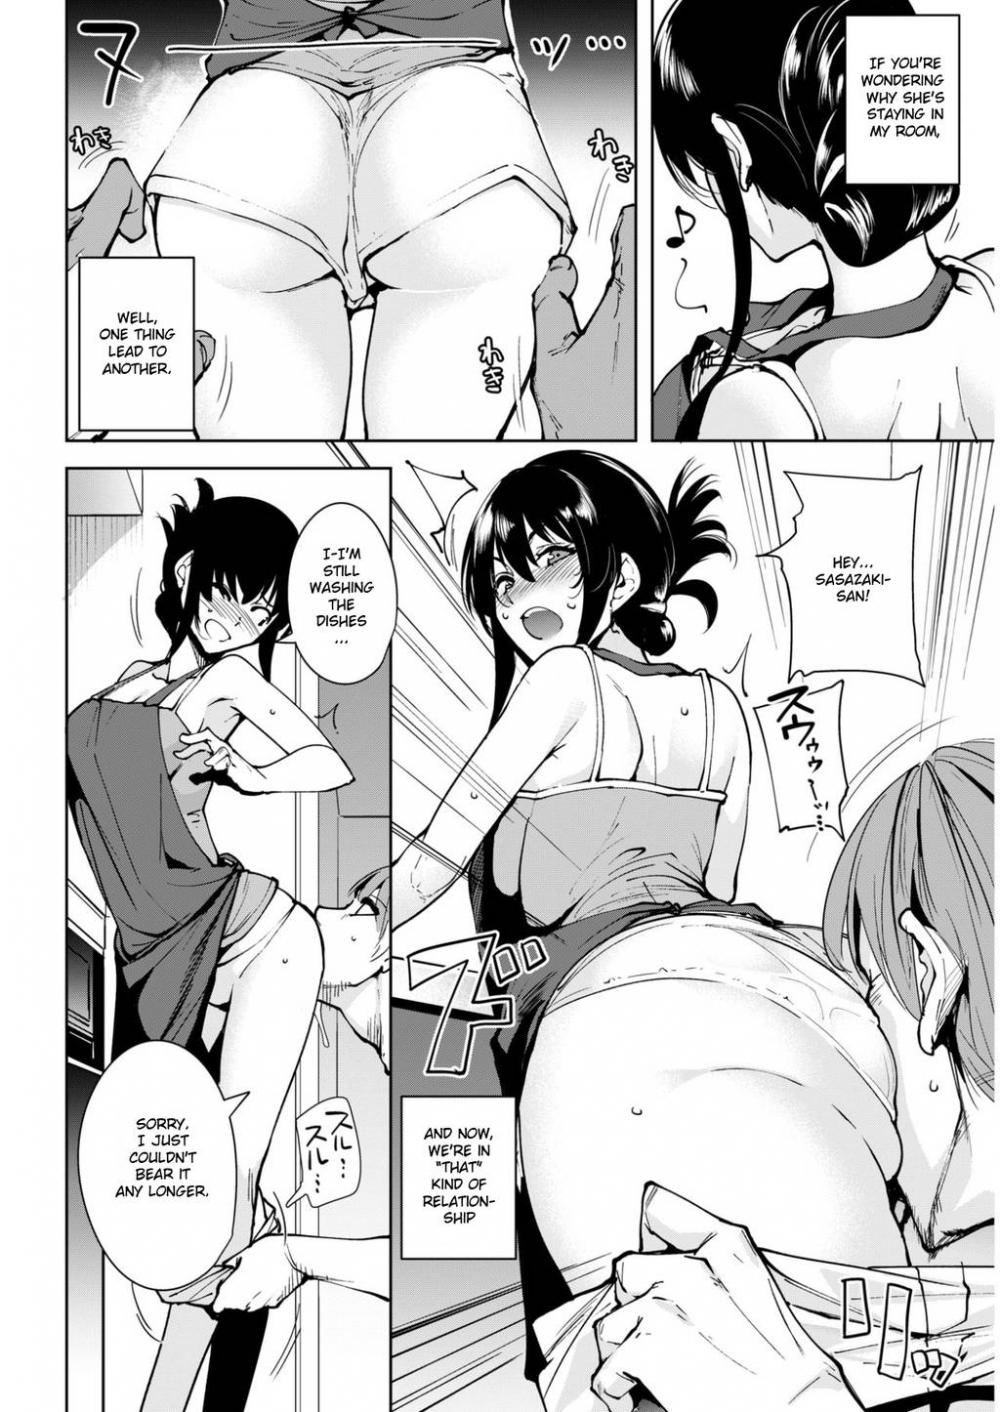 Hentai Manga Comic-How to Spend Extended Holidays-Read-2